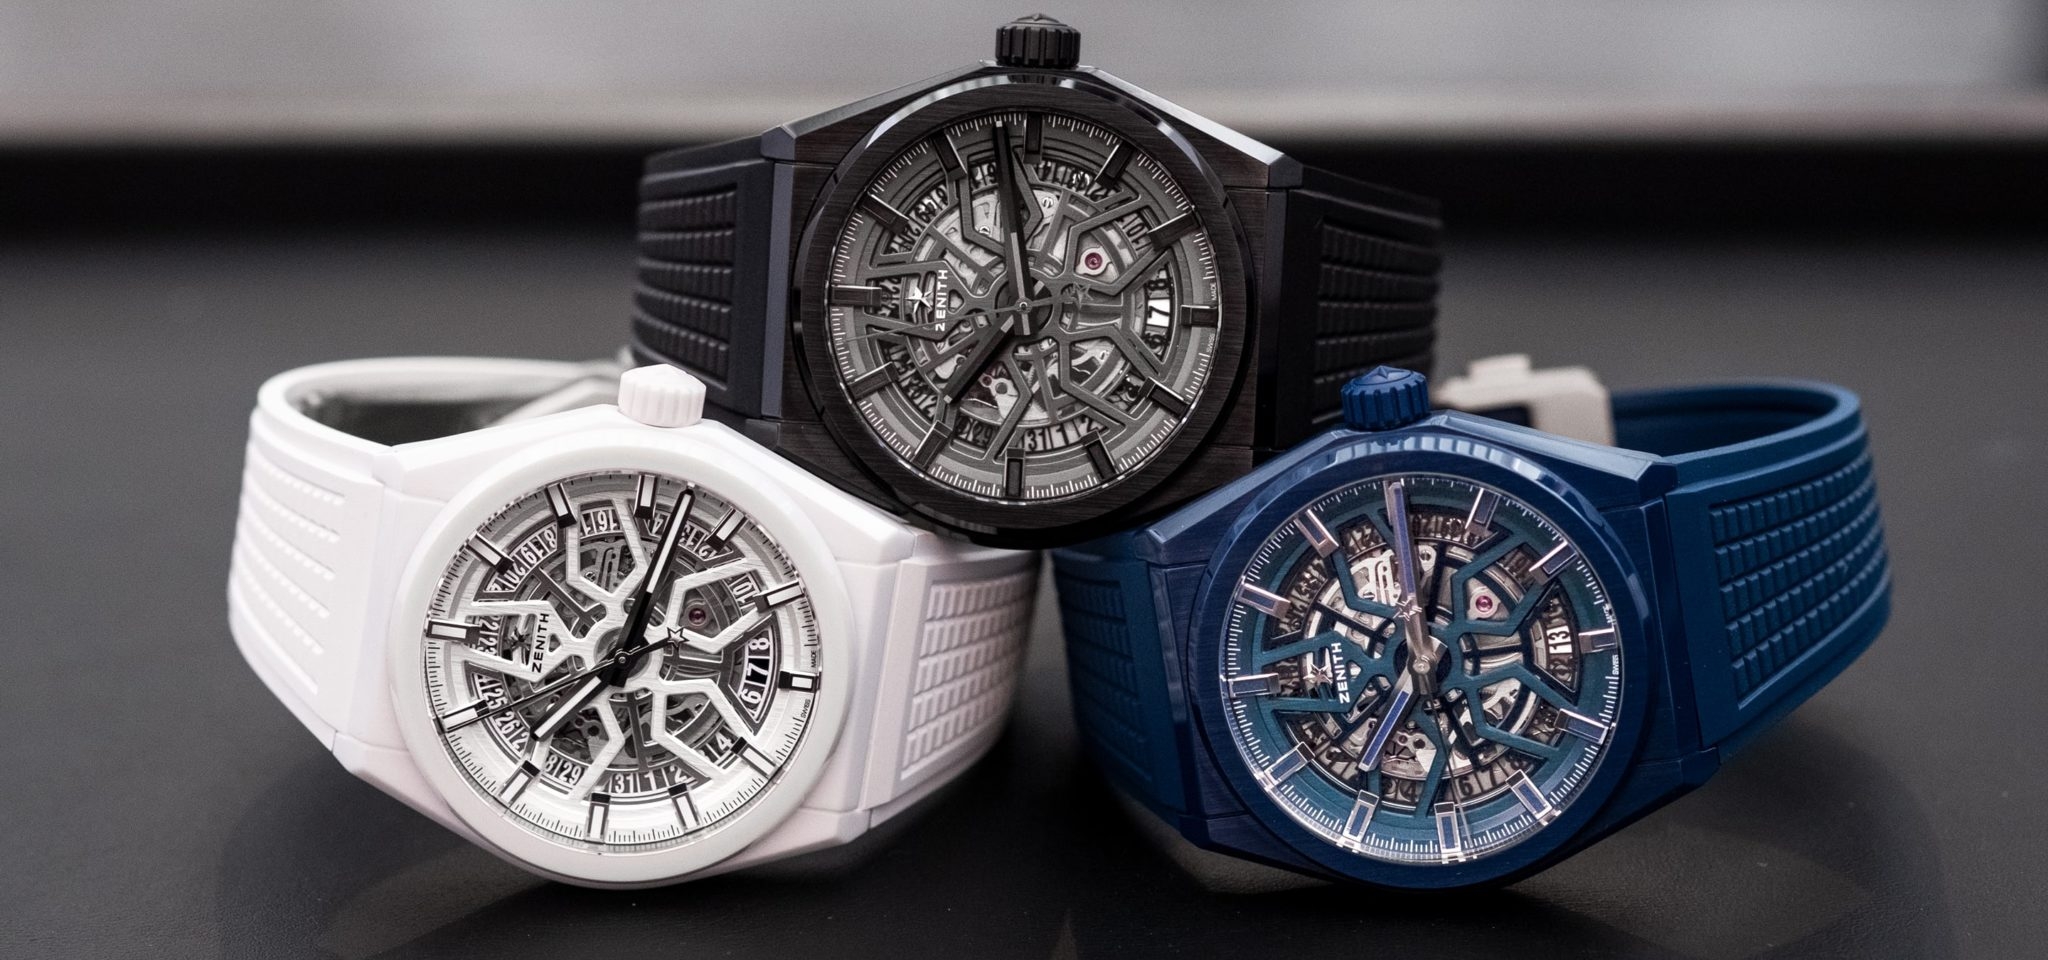 Who needs Rolex? The Zenith Defy collection